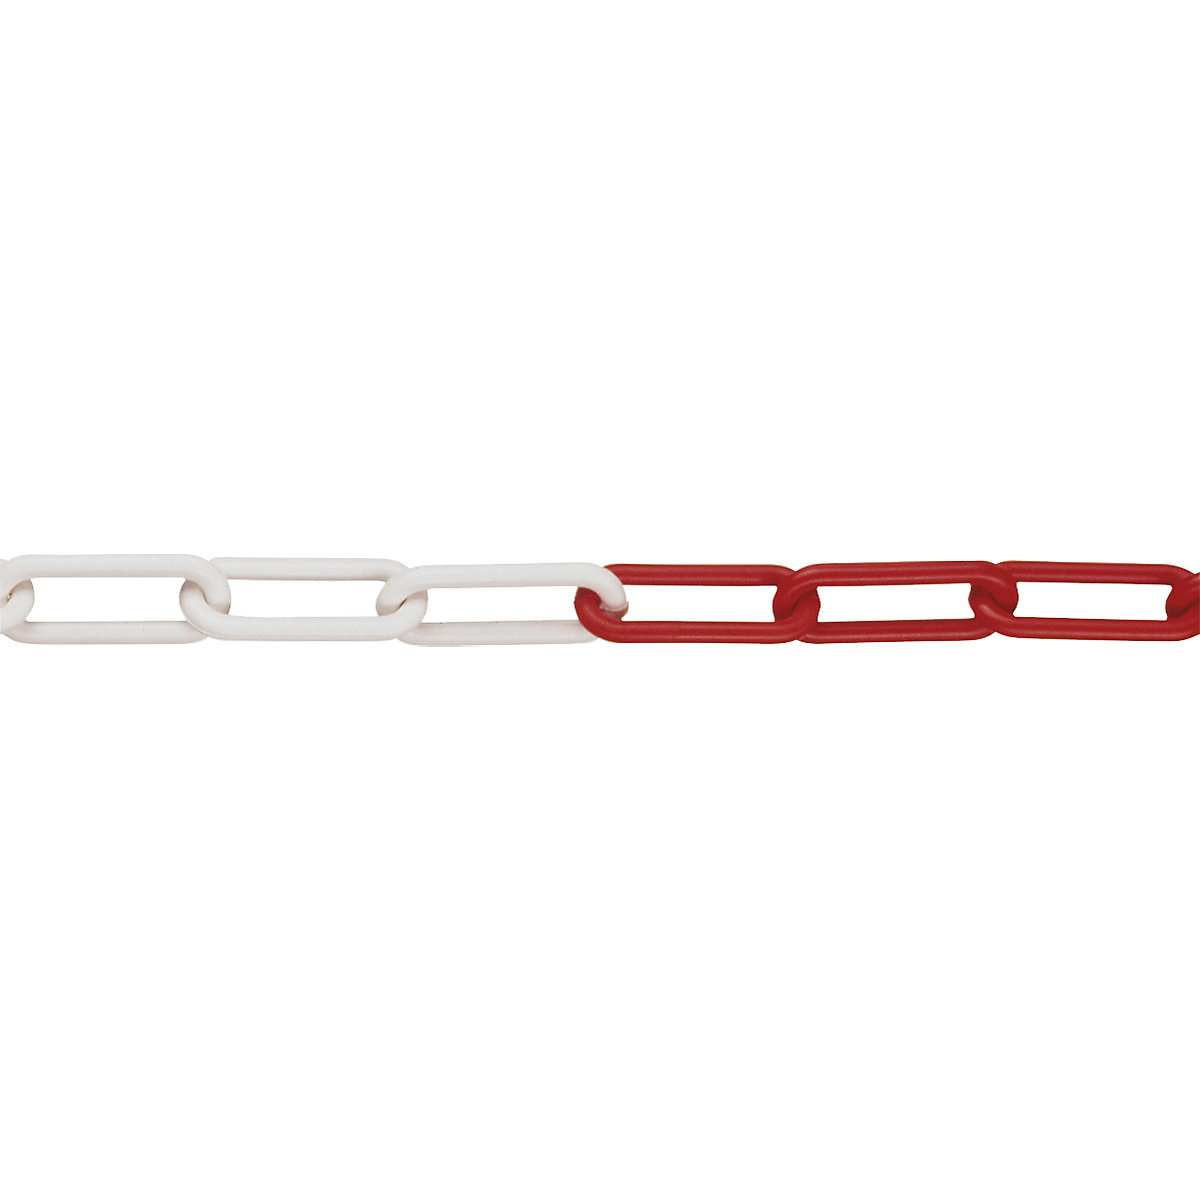 PE link chain, link thickness 6 mm, band length 50 m, red/white-2